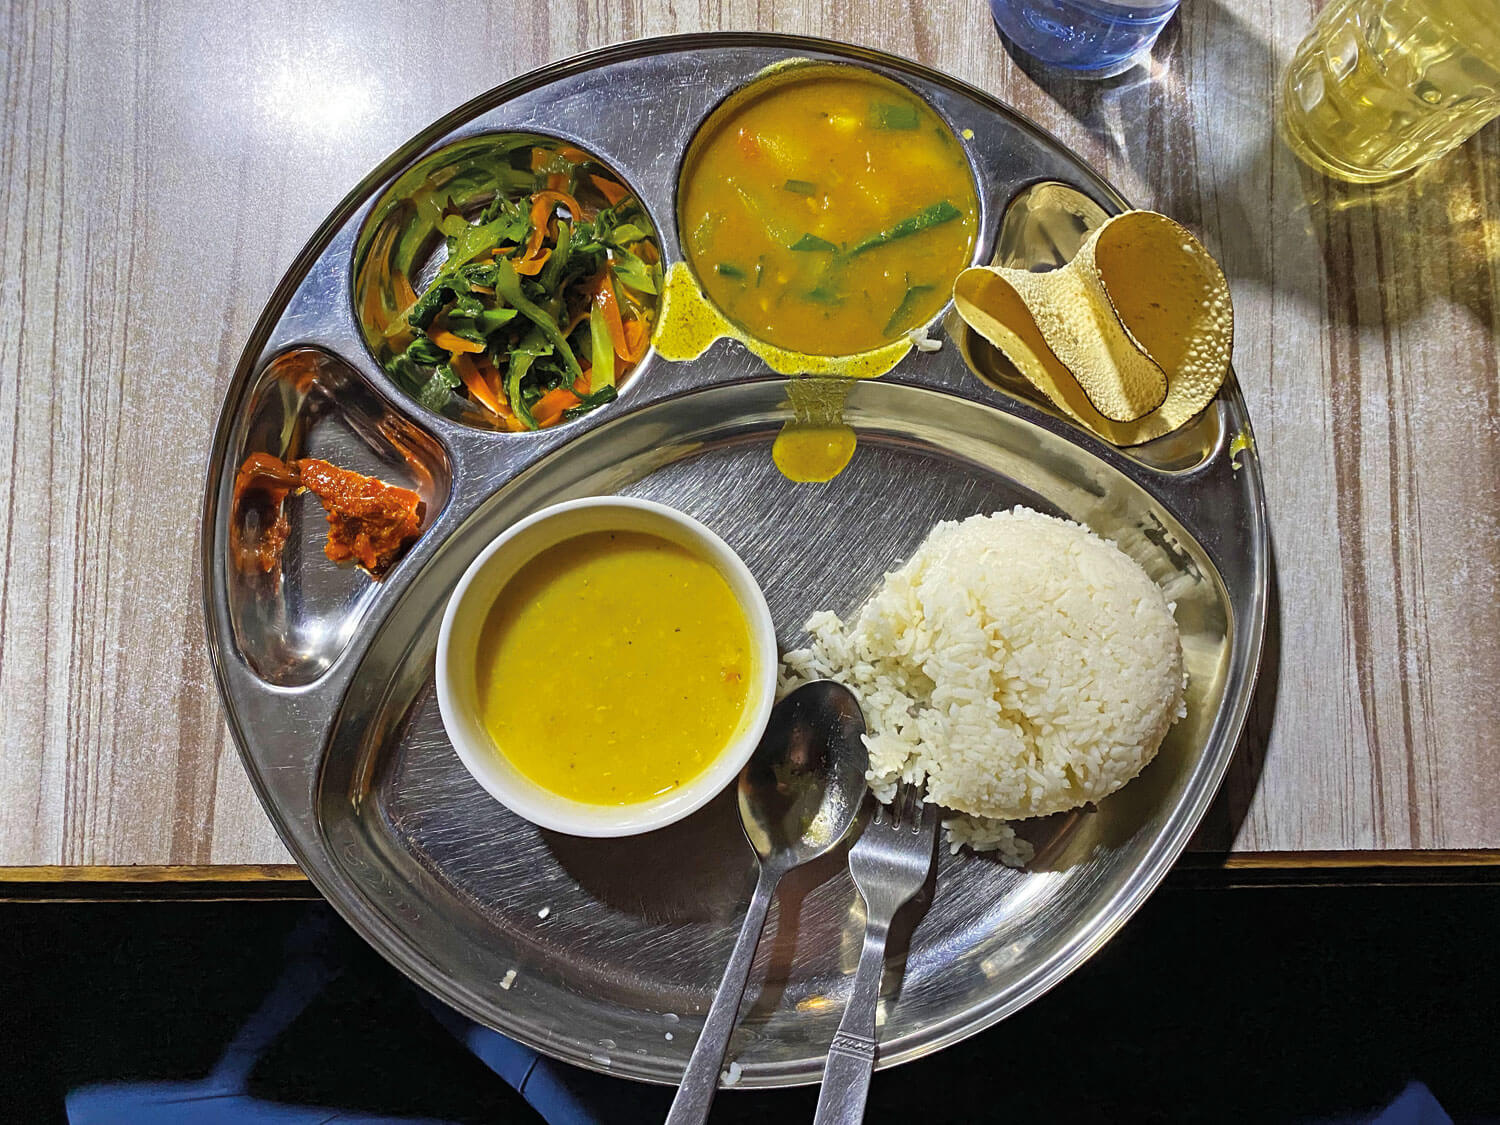 The classic Nepalese meal, dal bhat, with rice, lentils and vegetables.